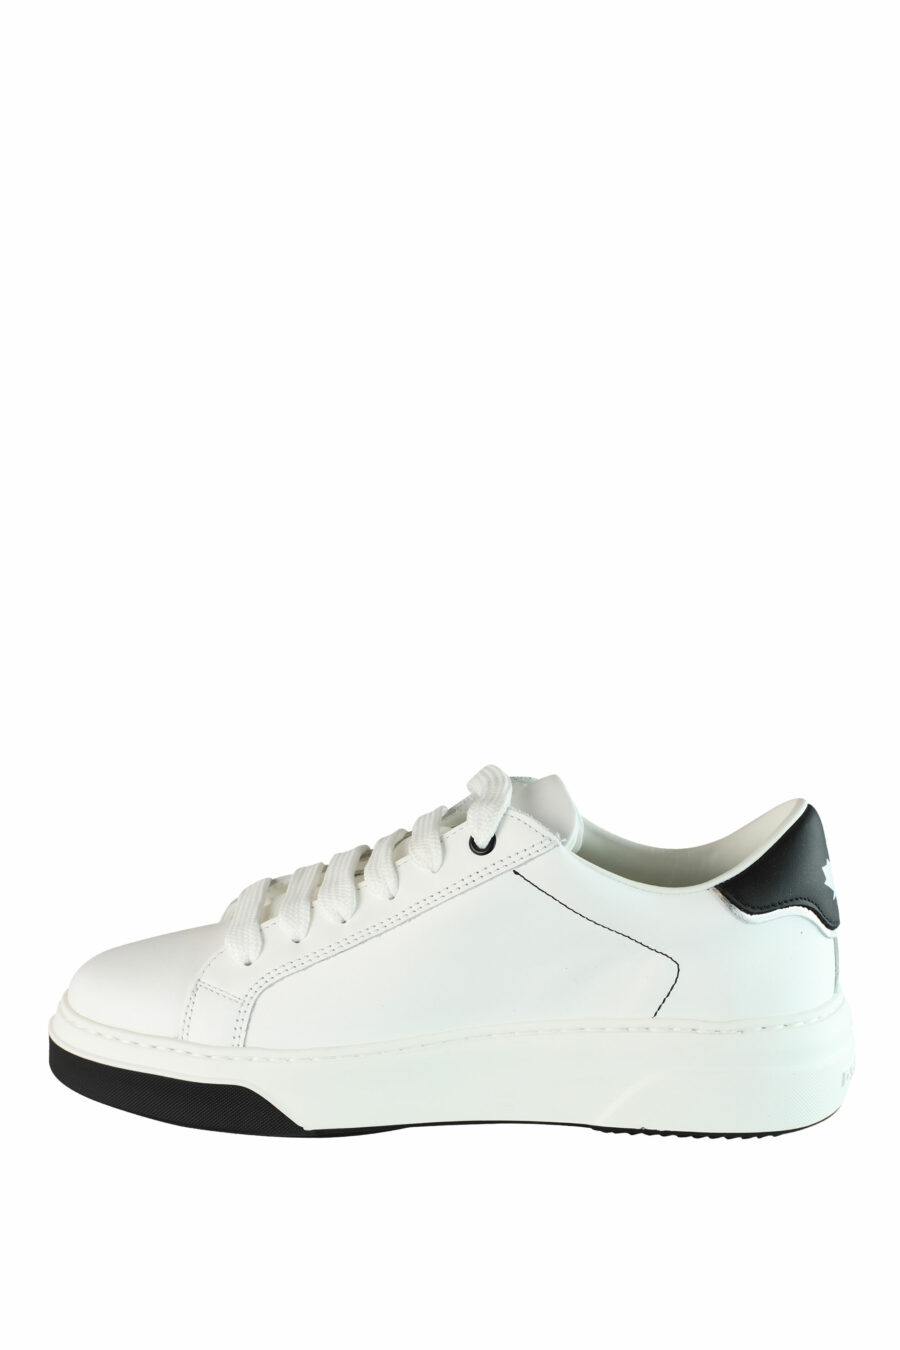 White "bumper" trainers with black details and logo - IMG 1427